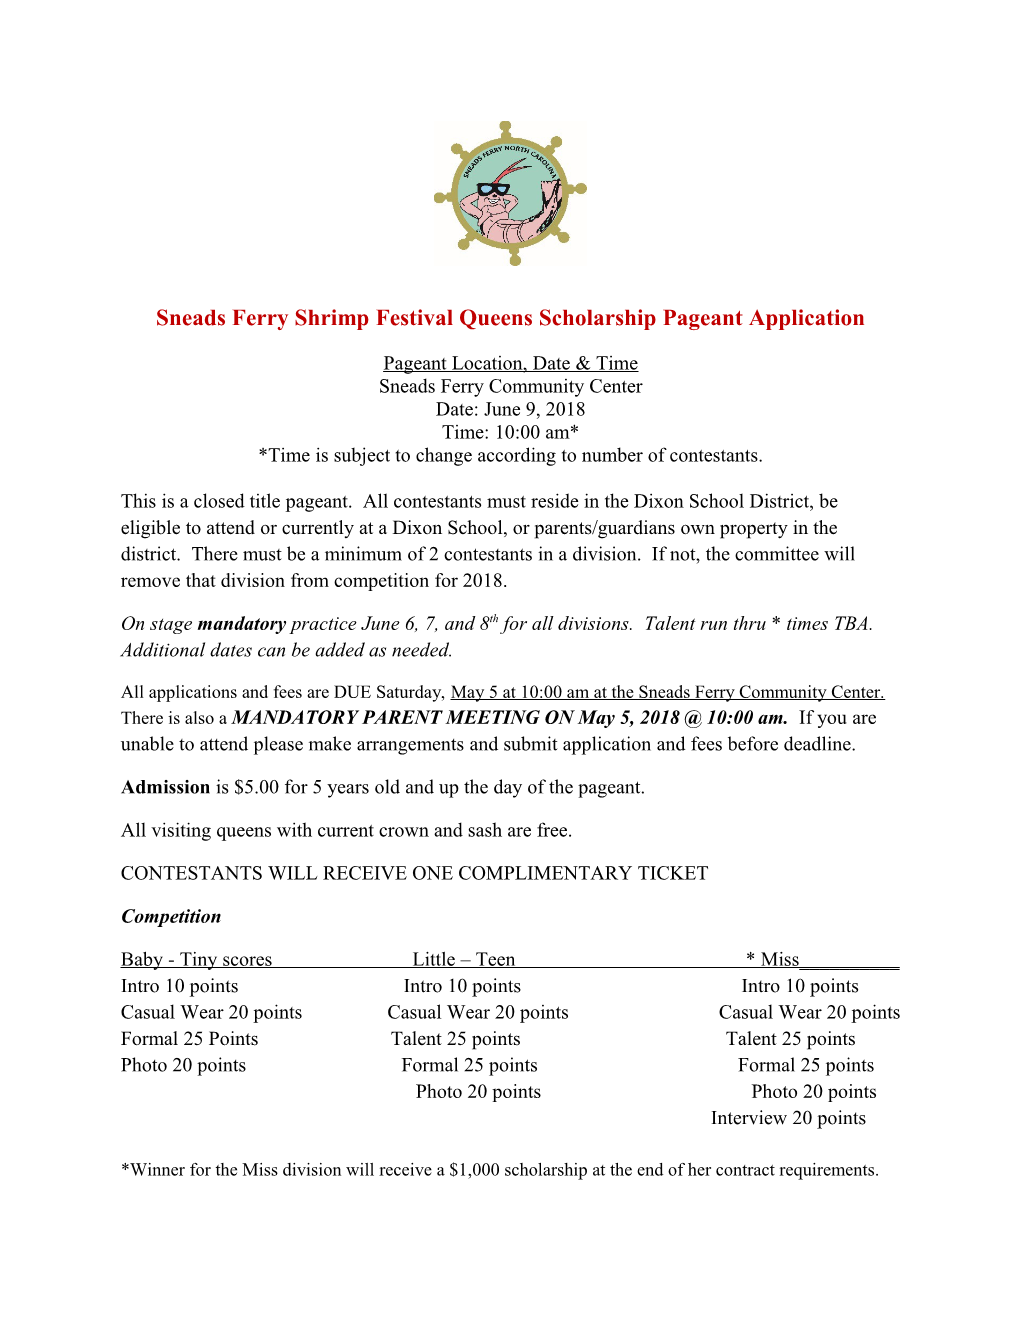 Sneads Ferry Shrimp Festival Queens Scholarship Pageant Application